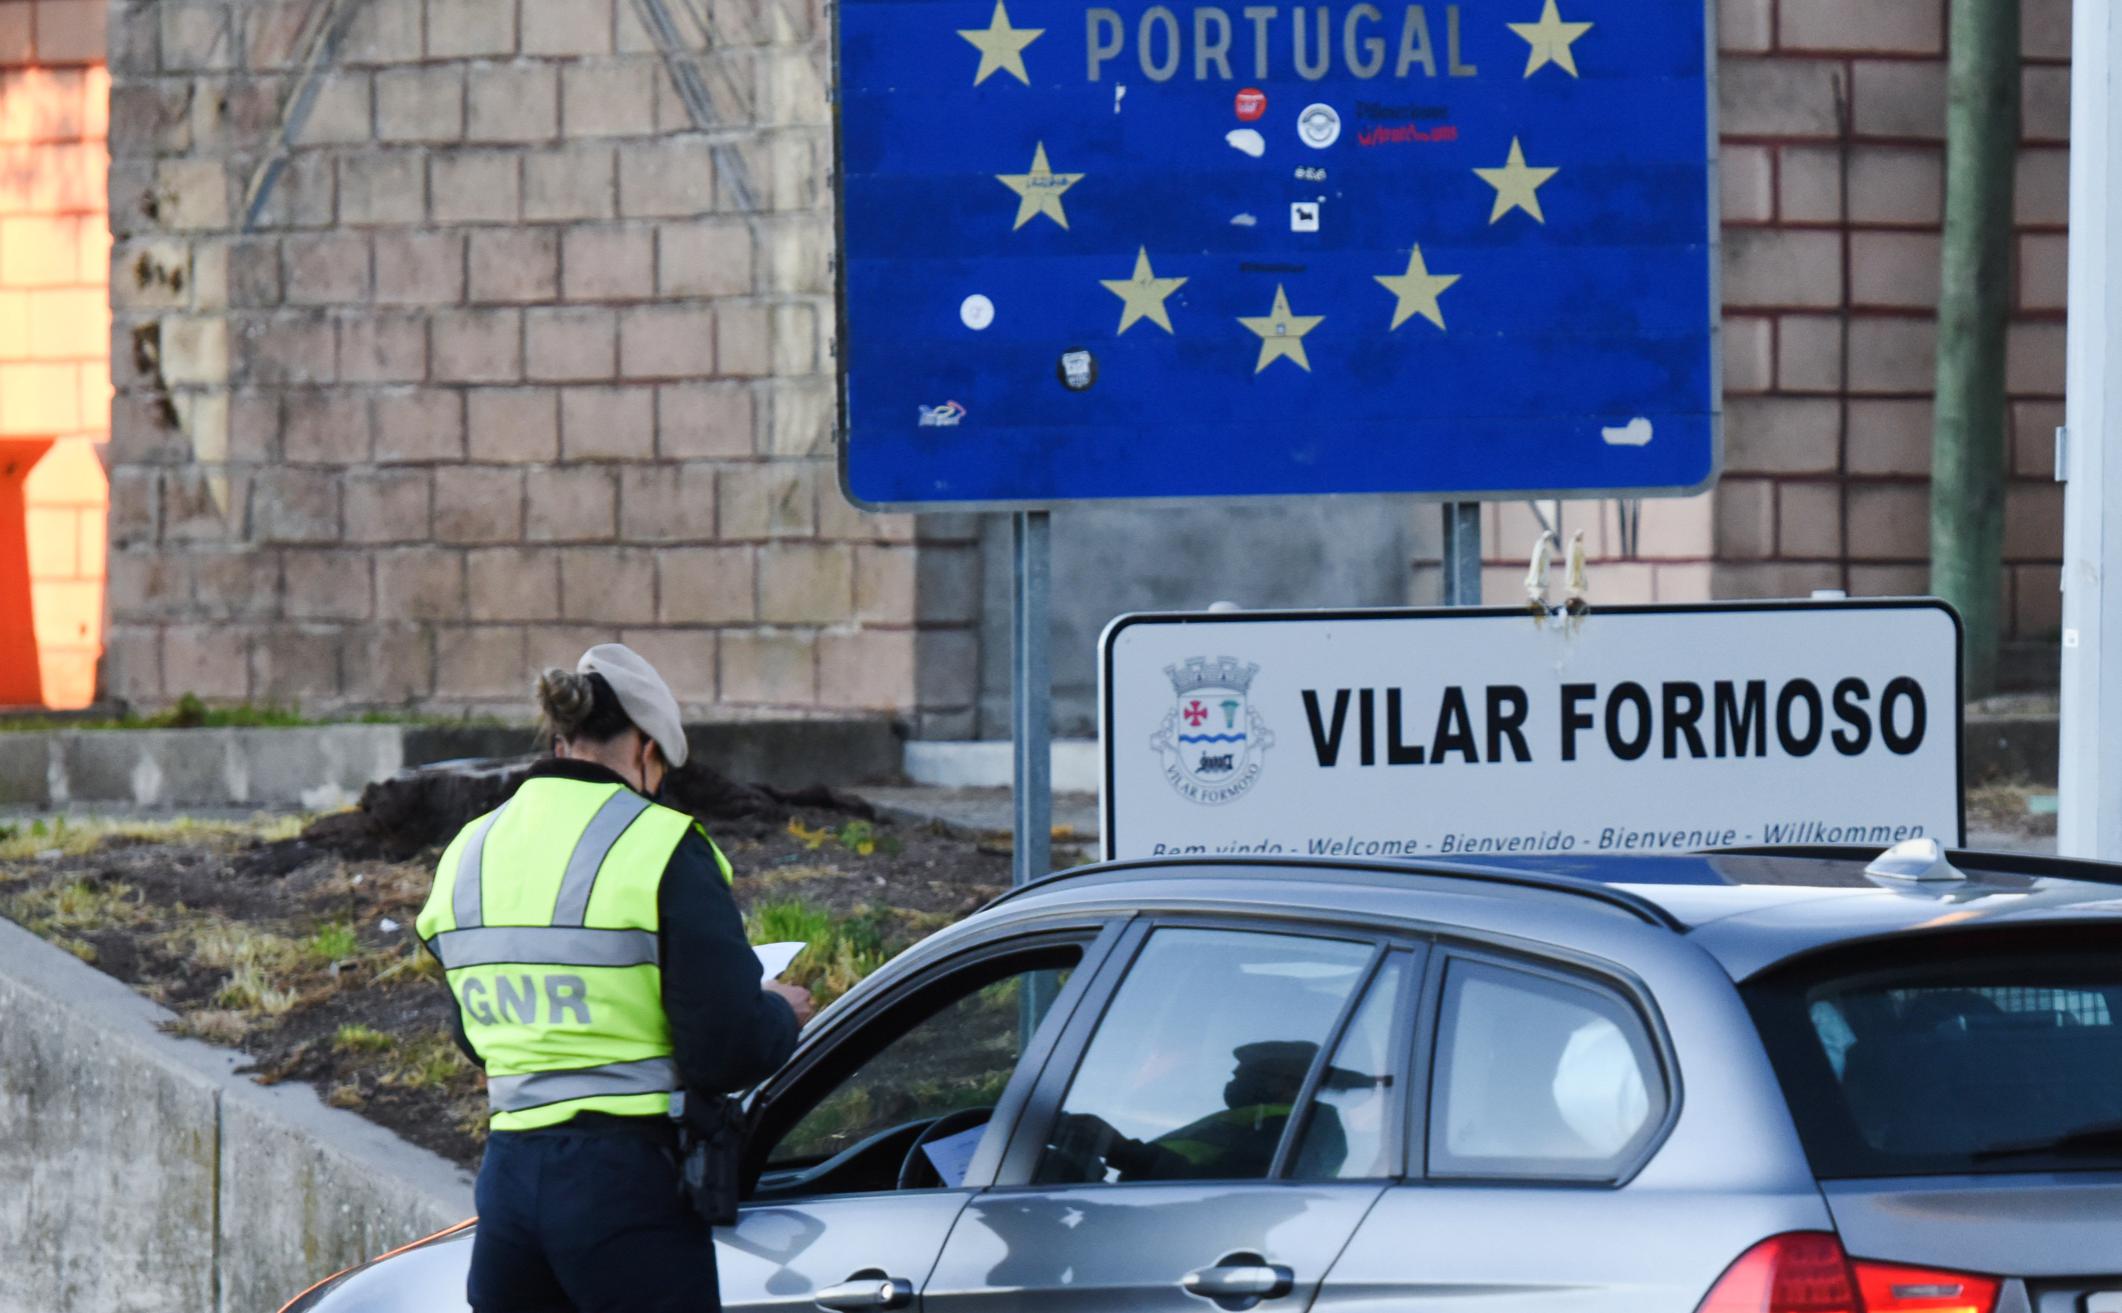 Portugal, following Germany, opposed the ban on Russians entering the EU